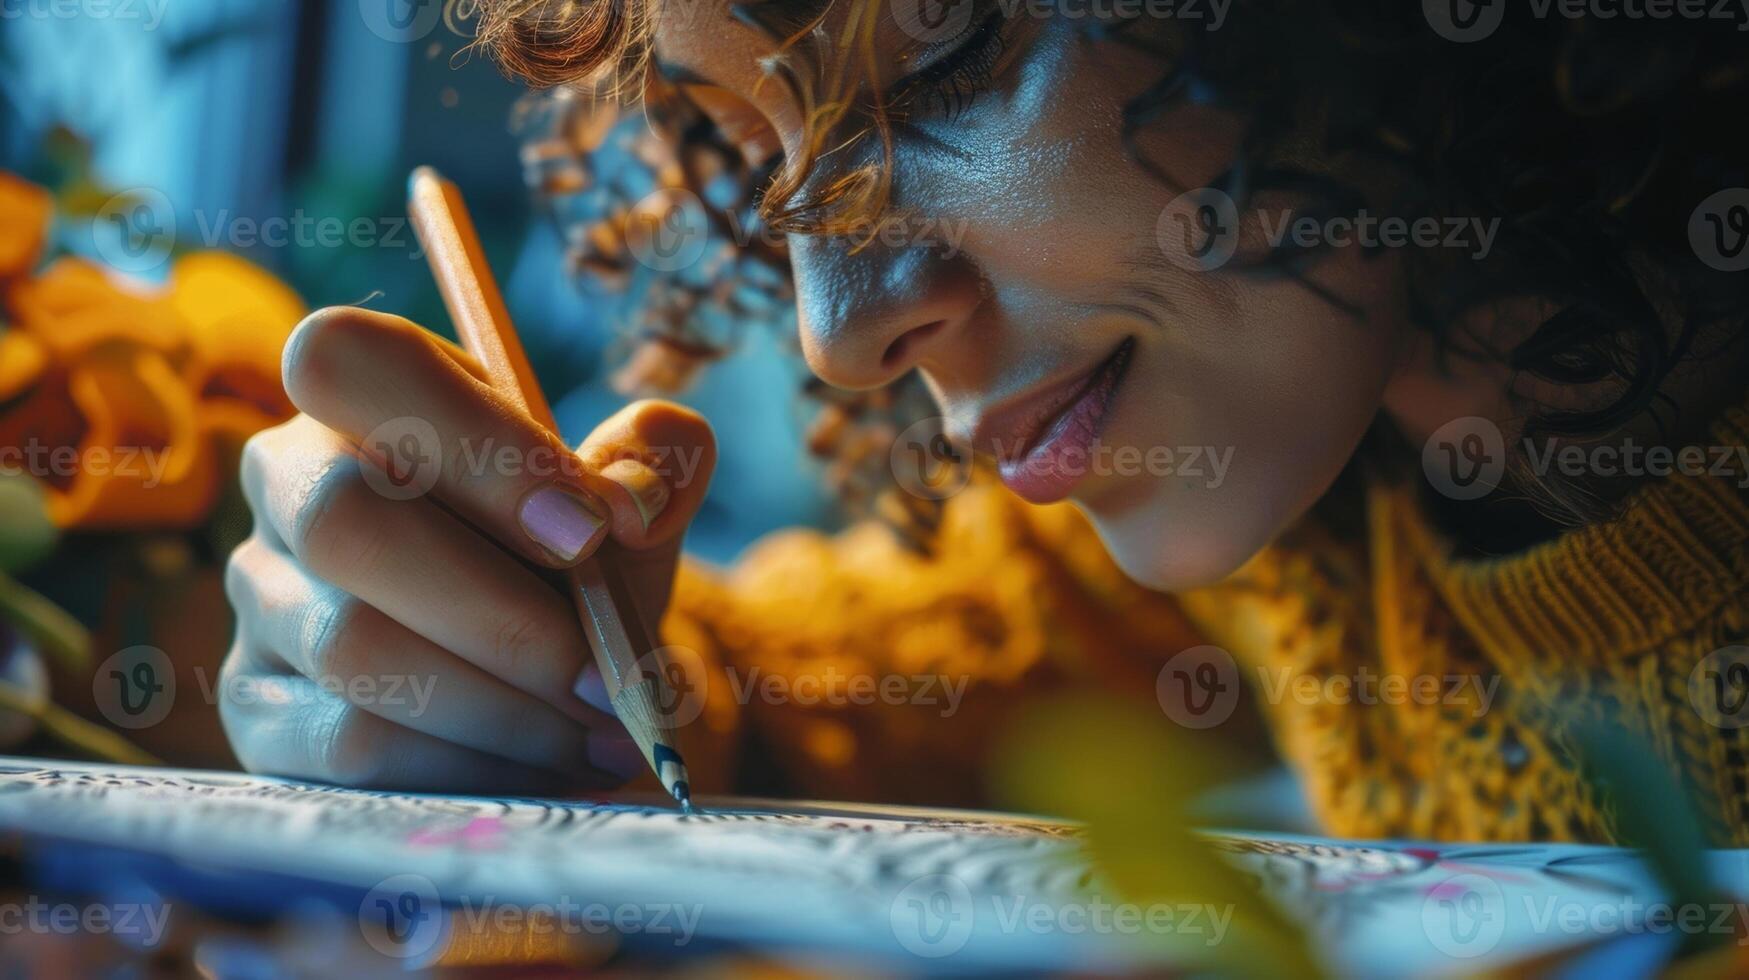 A persons relaxed and focused face as they lose themselves in the meditative process of coloring with premium supplies photo